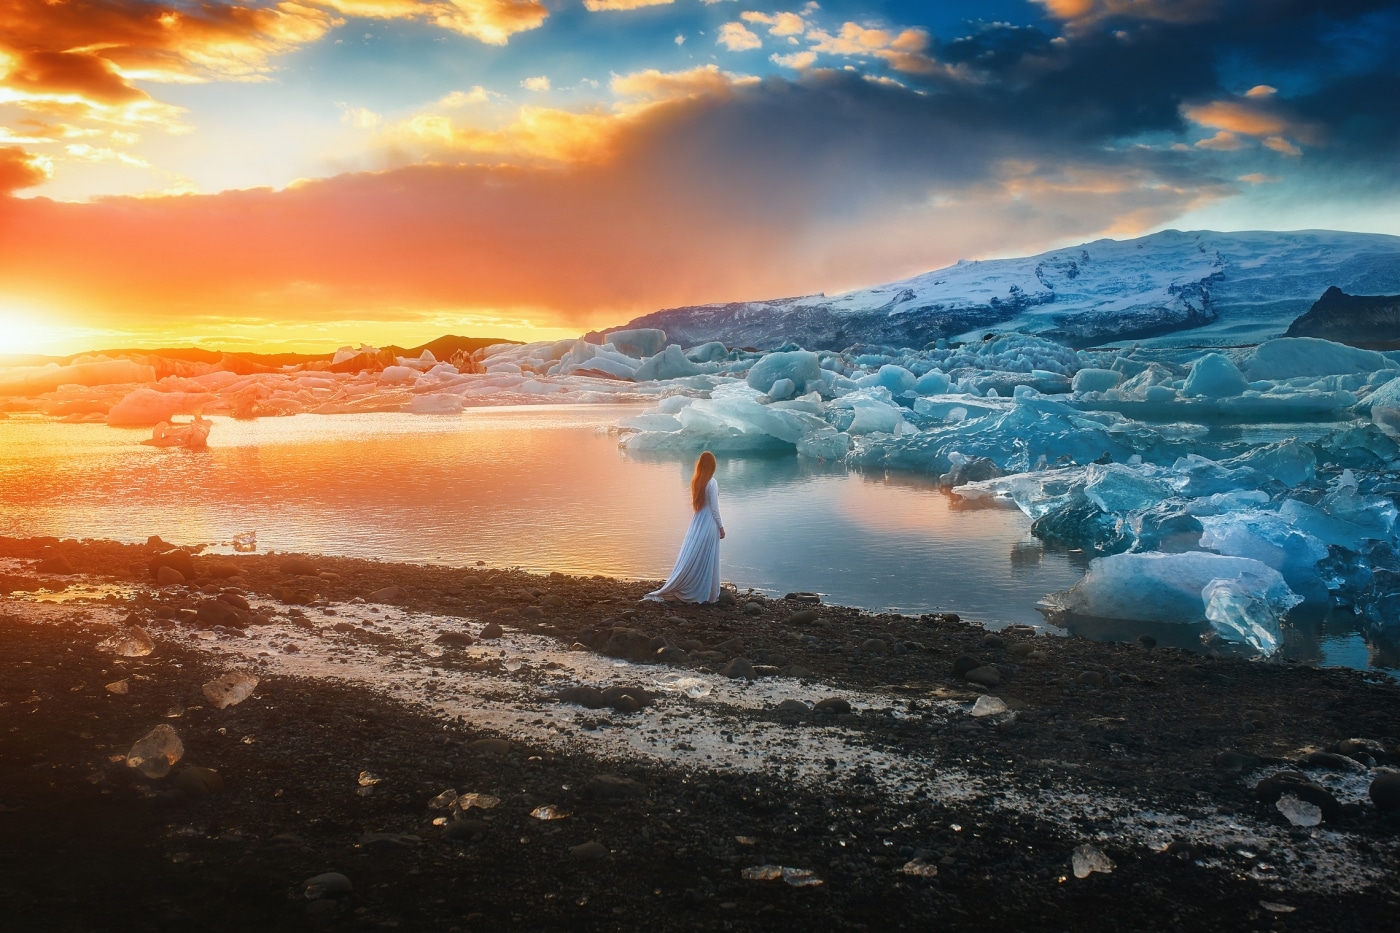 Follow Me Away Captures the Stunning Sights of Iceland